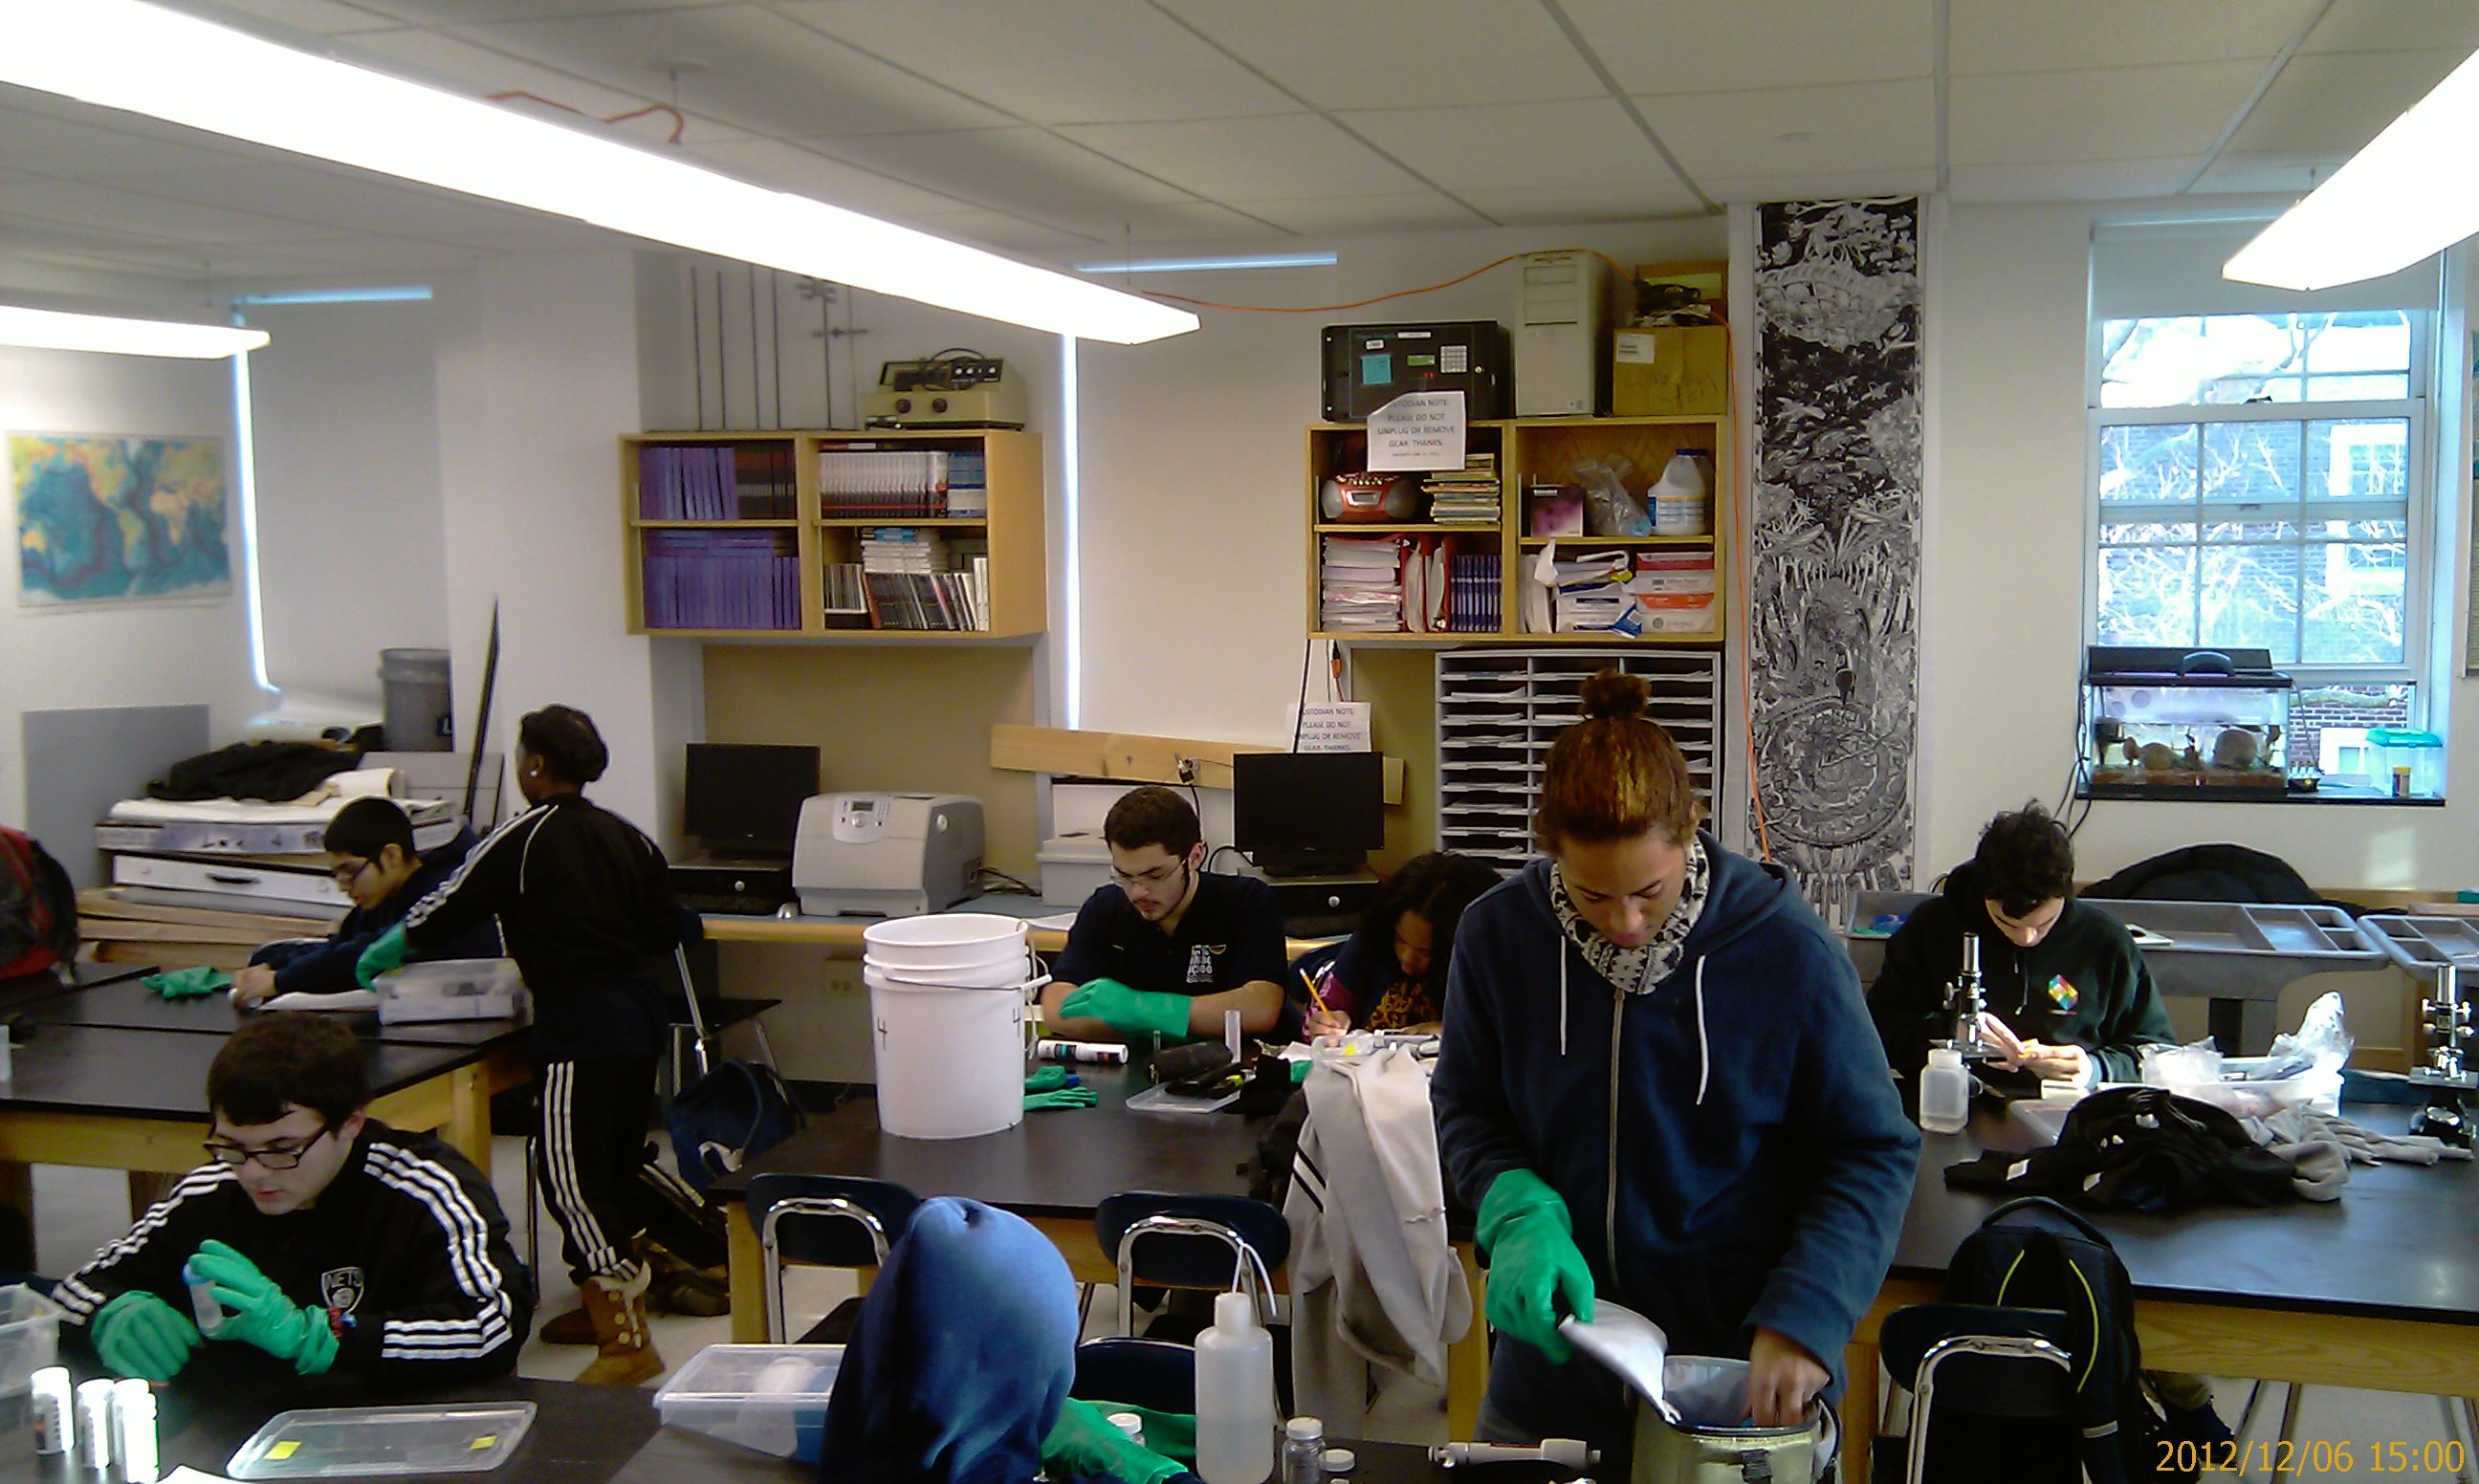 Research students processing samples in the MBRP lab.